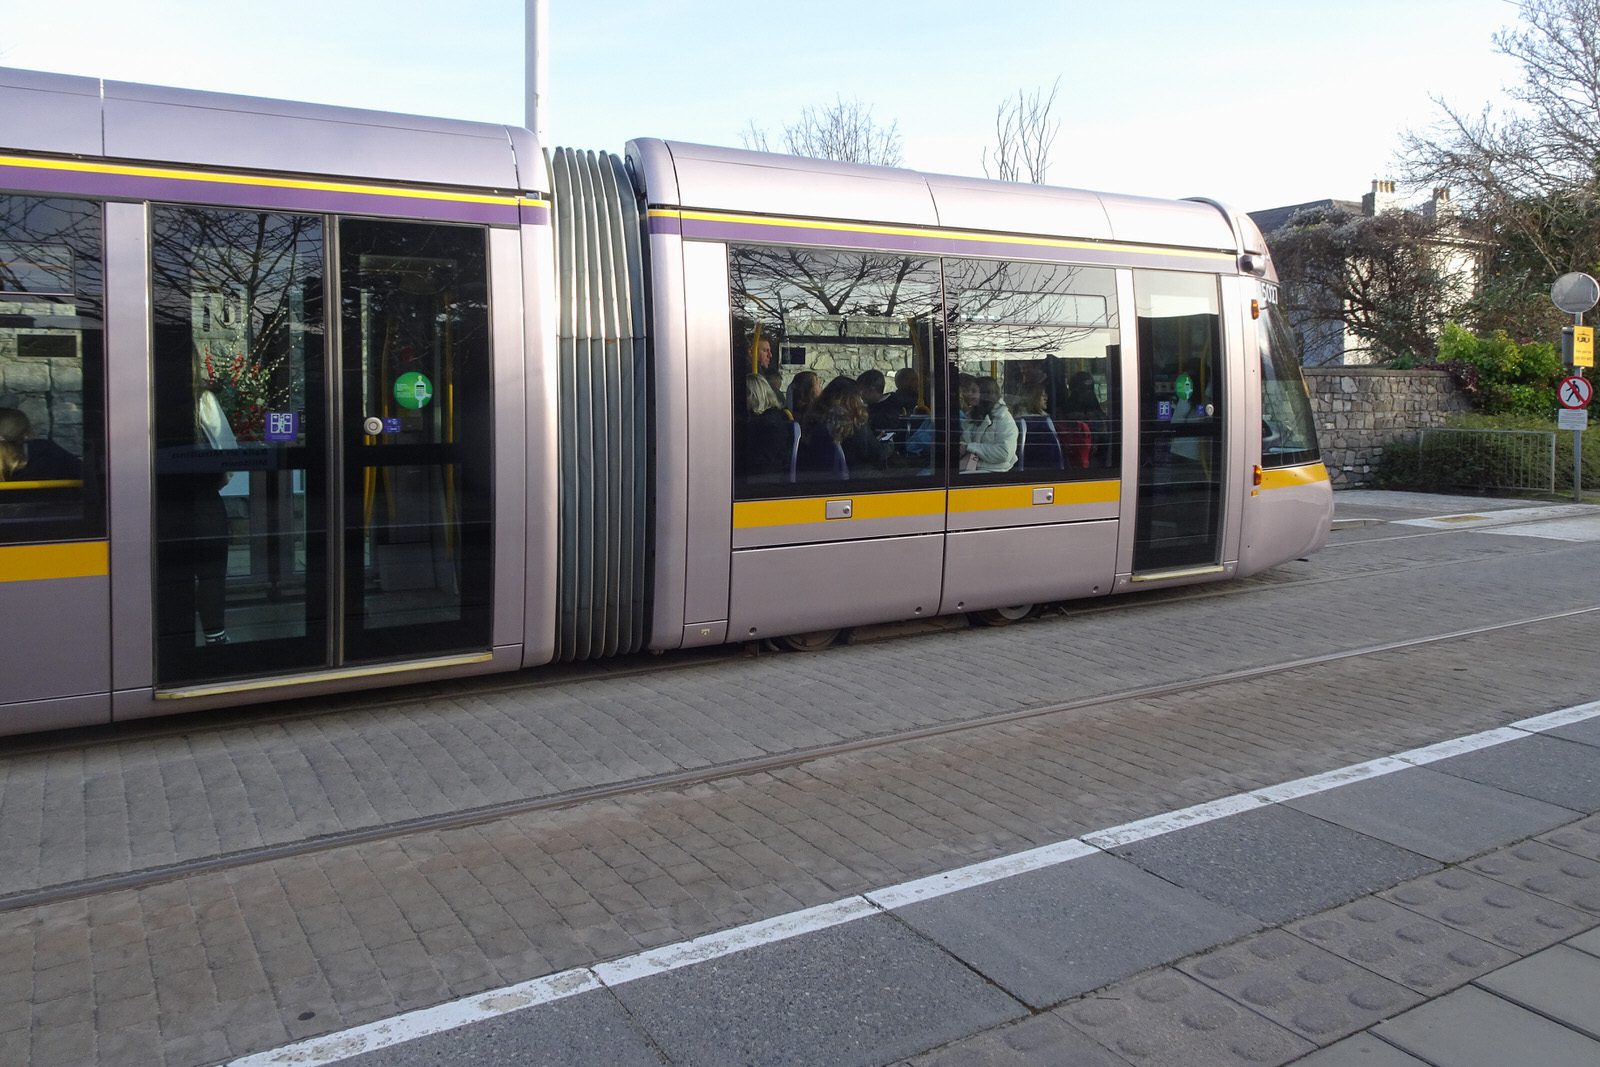 THE MILLTOWN LUAS TRAM STOP A FEW DAYS BEFORE CHRISTMAS DAY [AND NEARBY]-226266-1